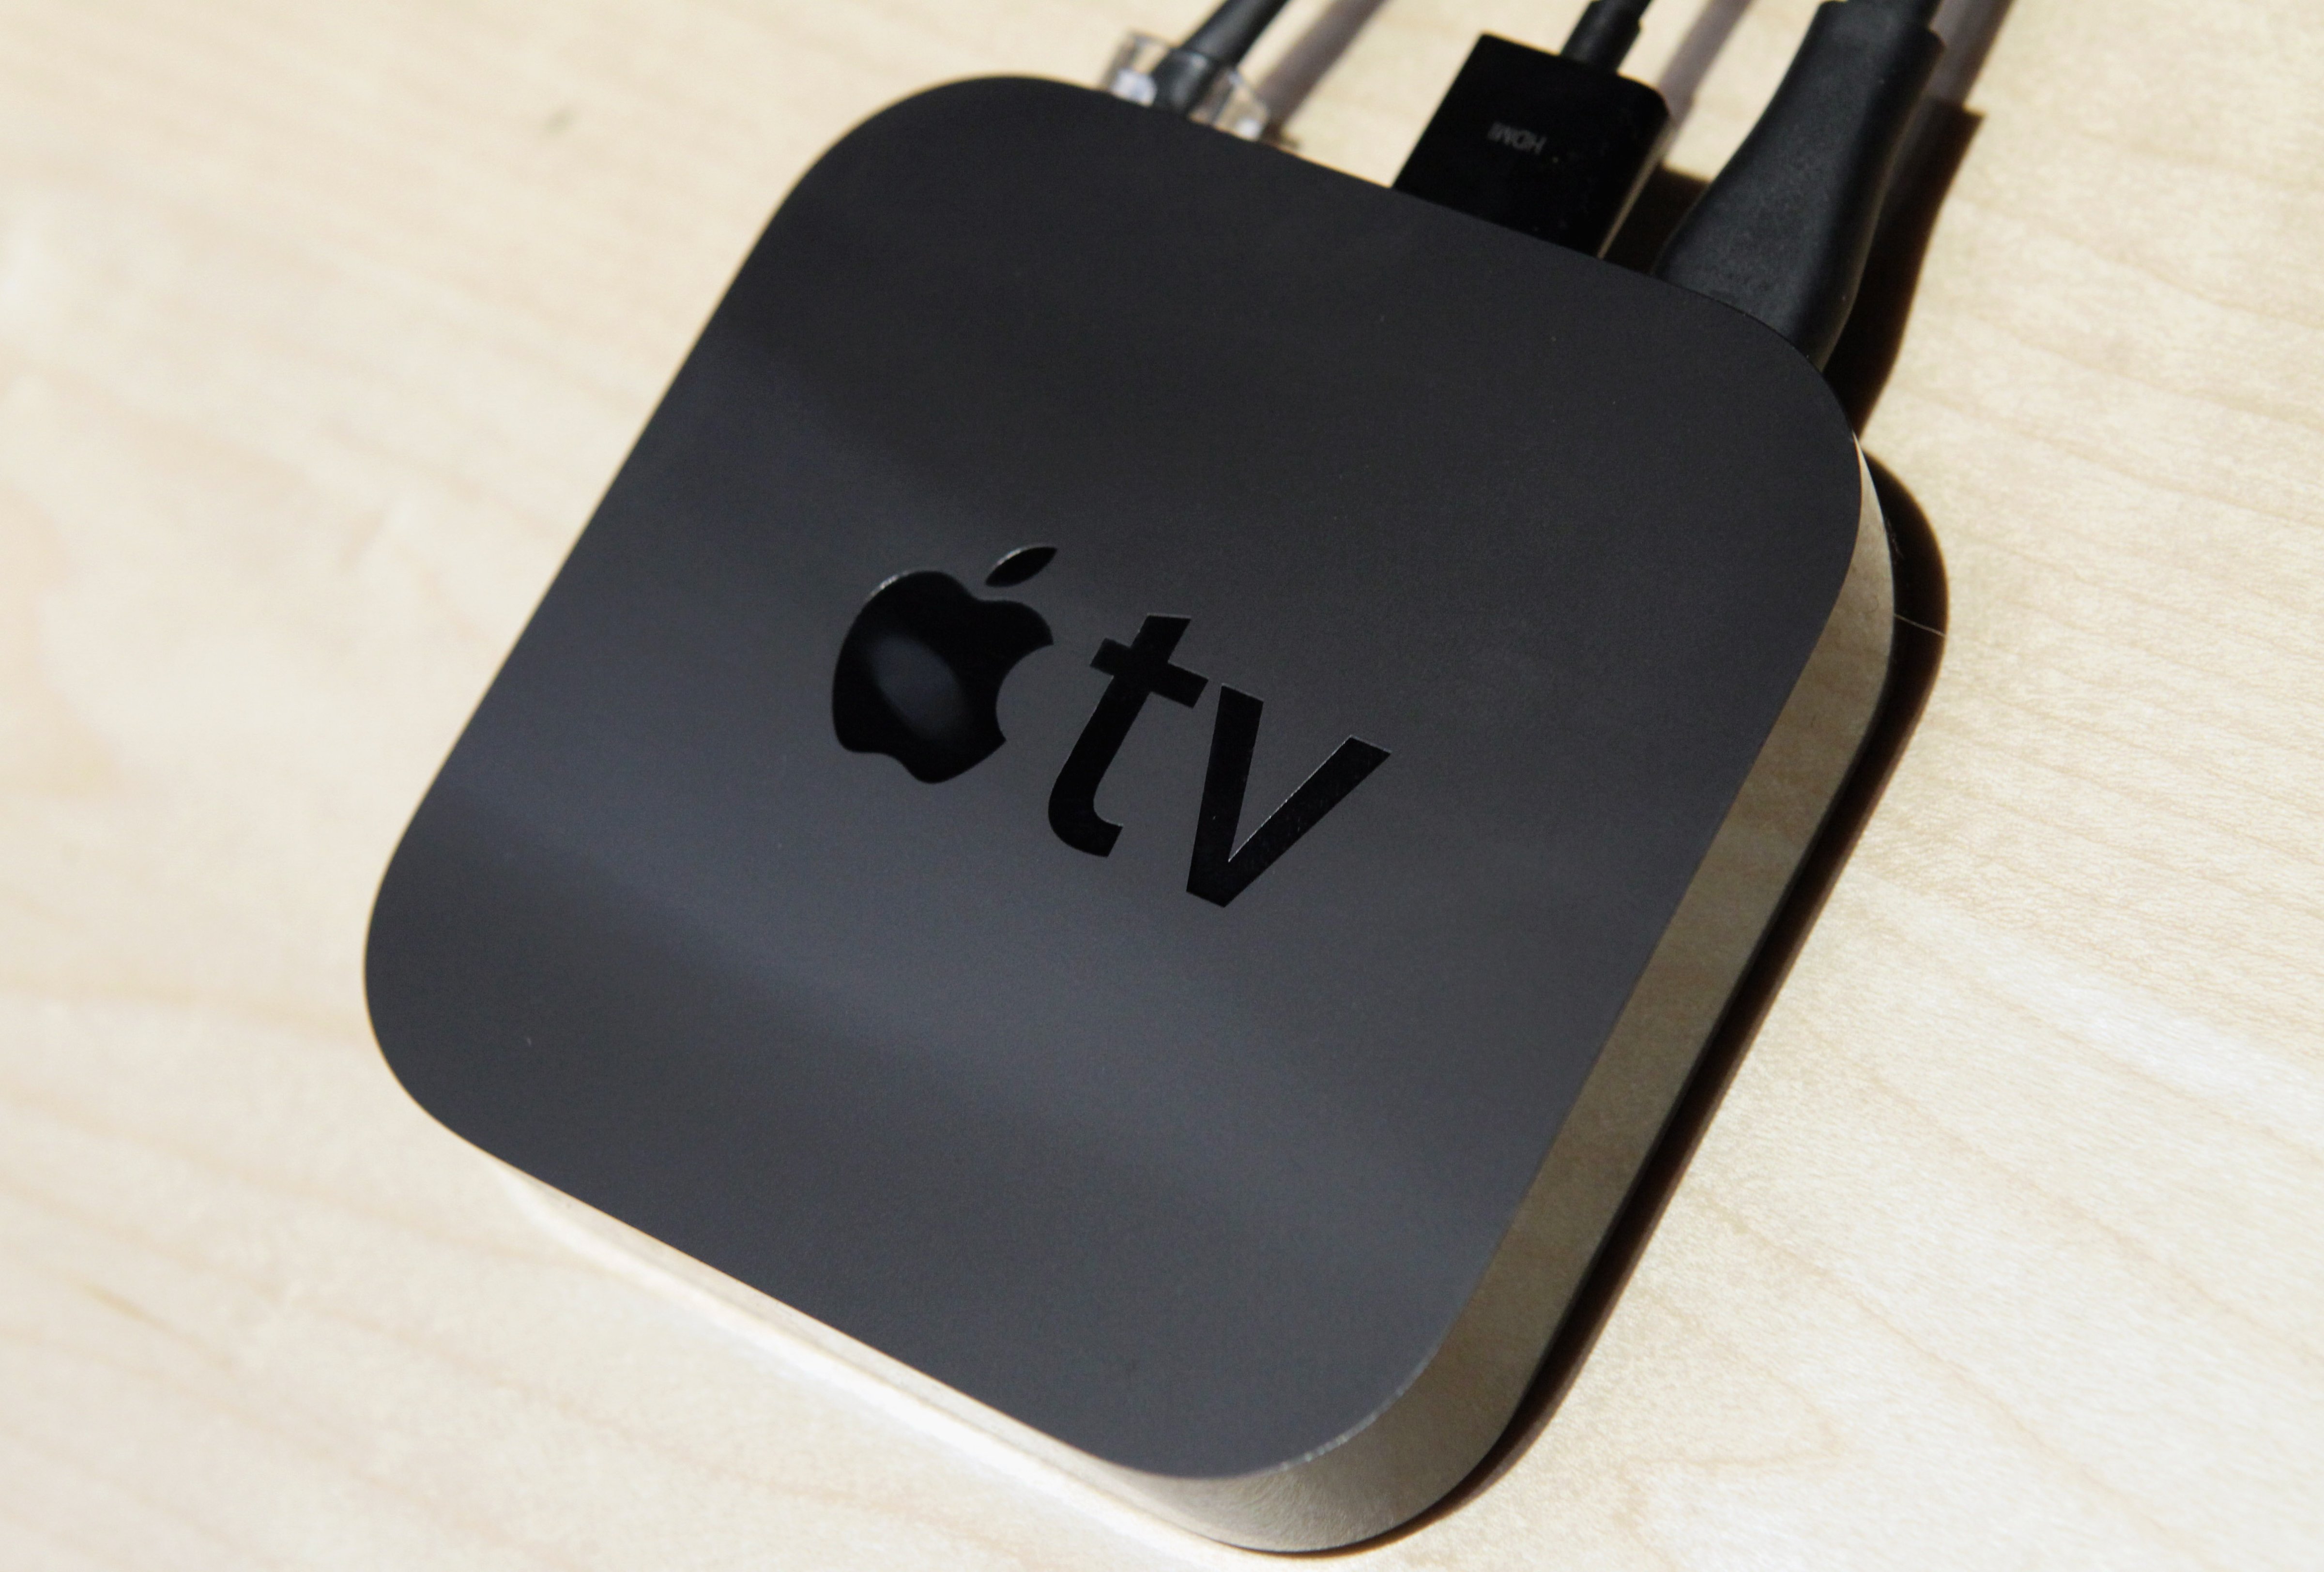 The new smaller version of Apple TV is displayed at an Apple Special Event at the Yerba Buena Center for the Arts September 1, 2010 in San Francisco, California. (Justin Sullivan&mdash;Getty Images)